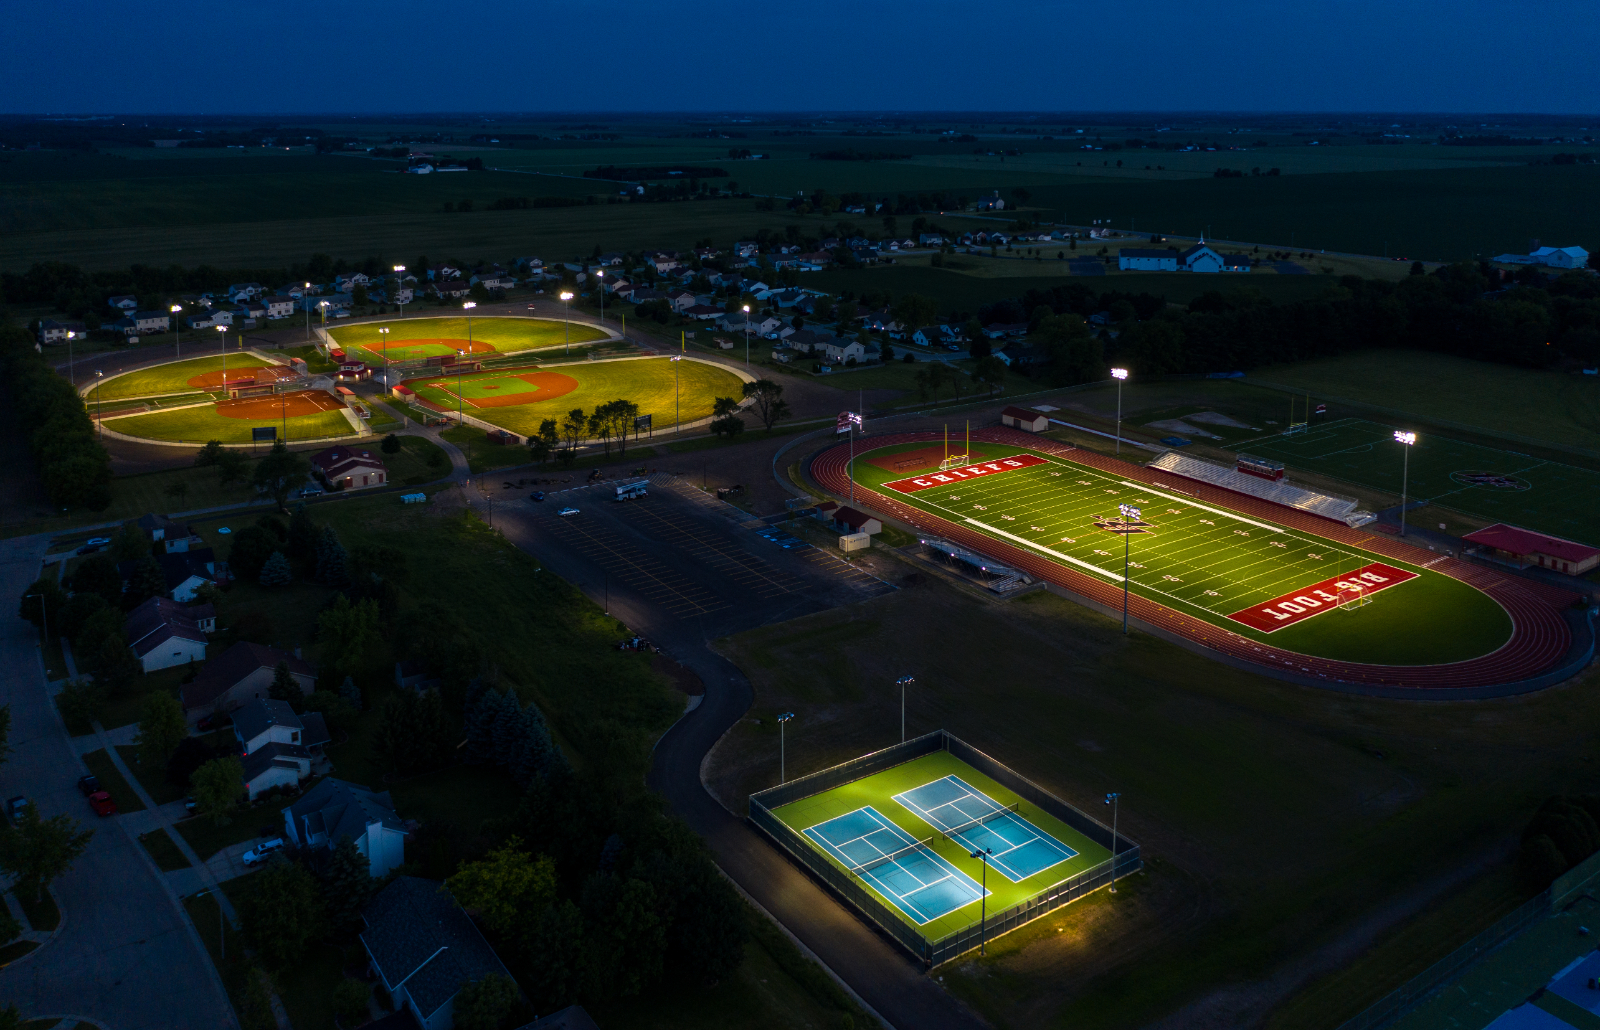 Various sports fields at night